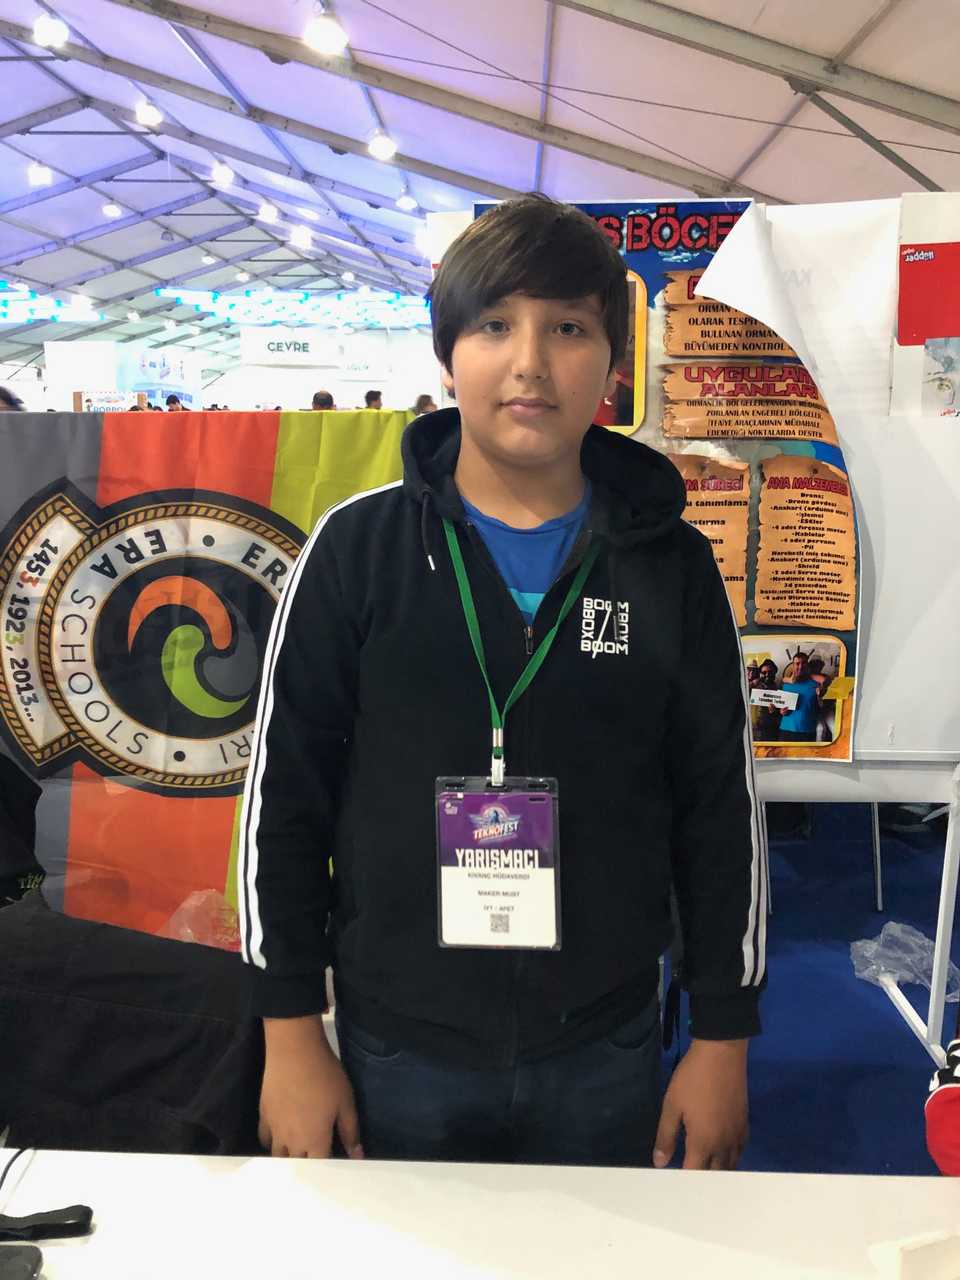 Kivanc Hudaverdi, 12, a student at Era Koleji Gaziosmanpasa (Istanbul) was representing the Maker Must team. His team worked a project to put out forest fires without human intervention via drones.